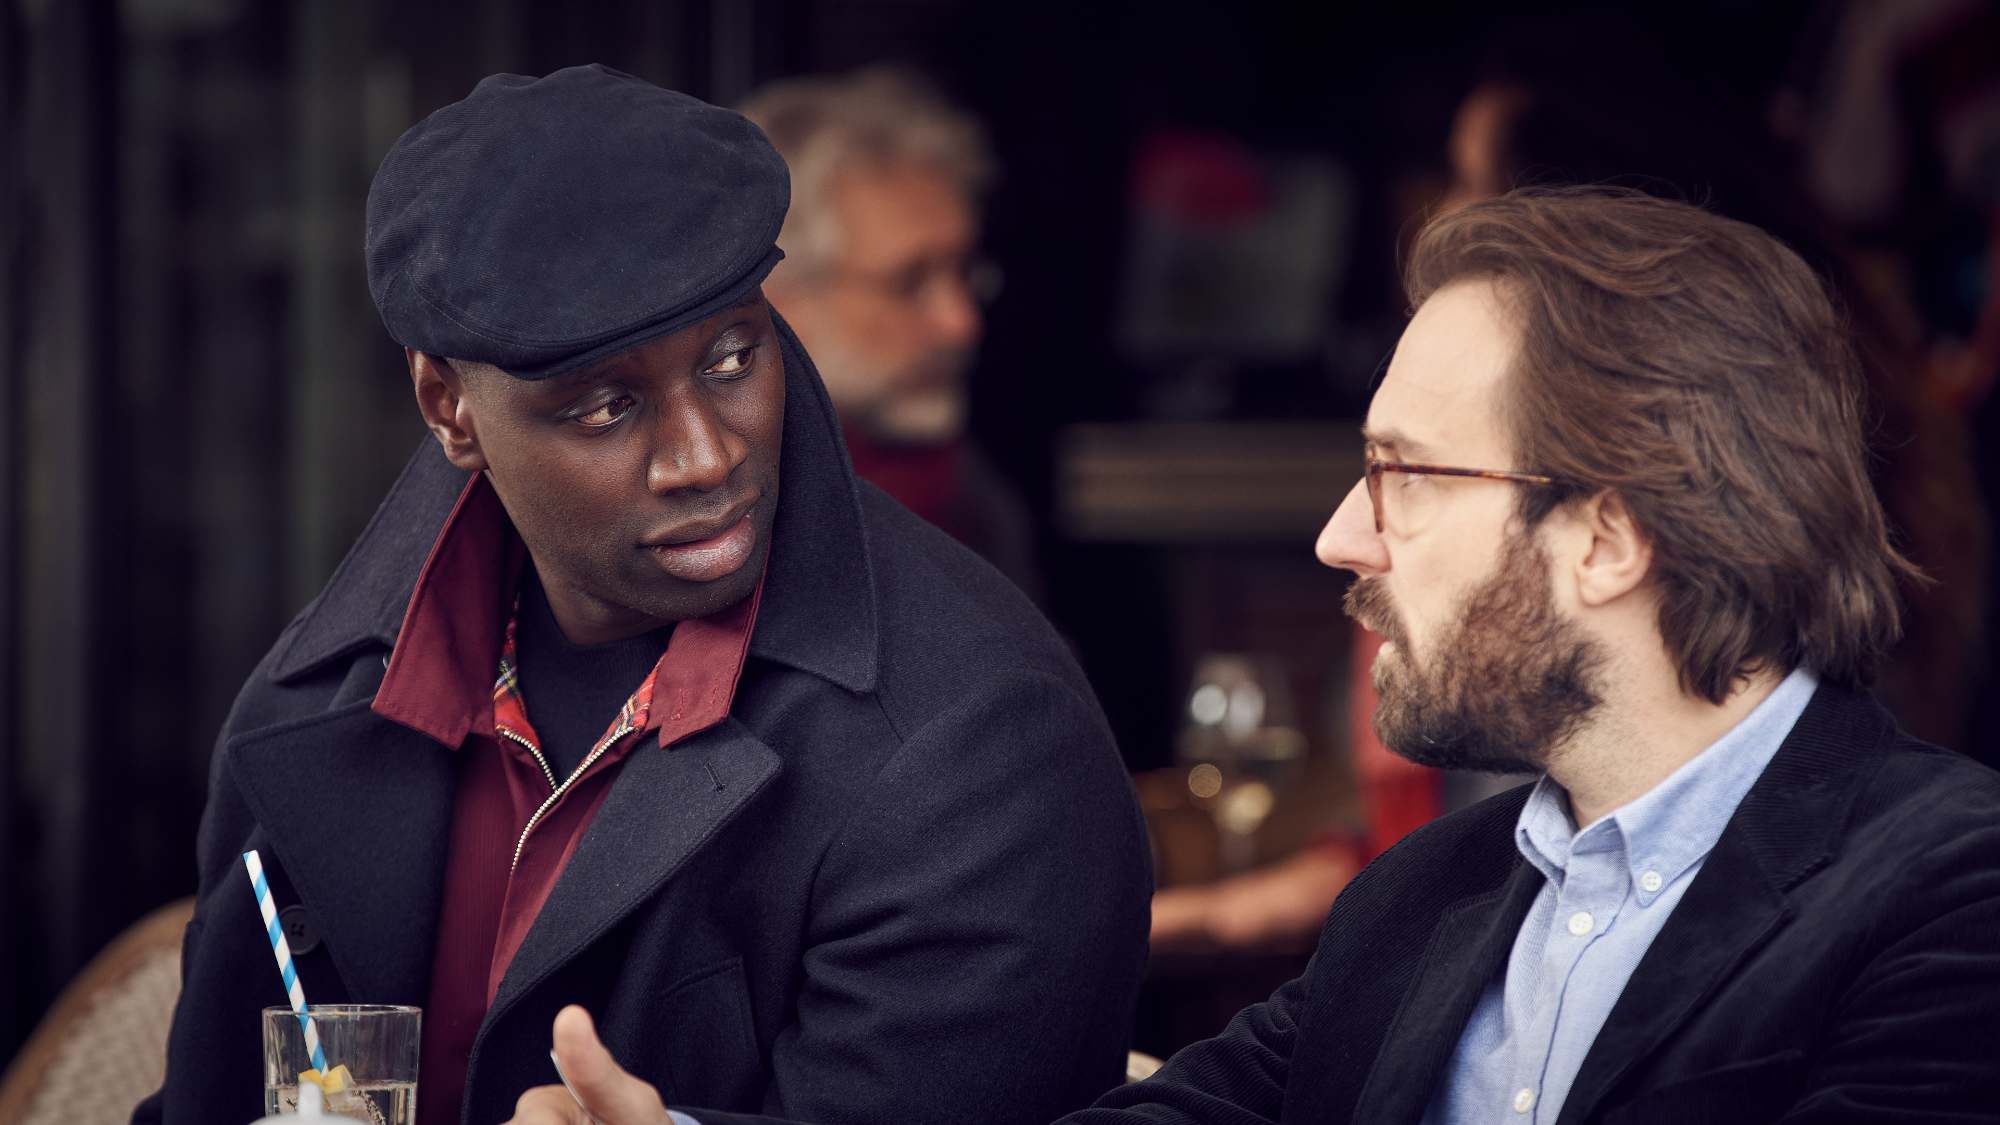 Omar Sy in Lupin sitting on a patio with someone having a conversation.